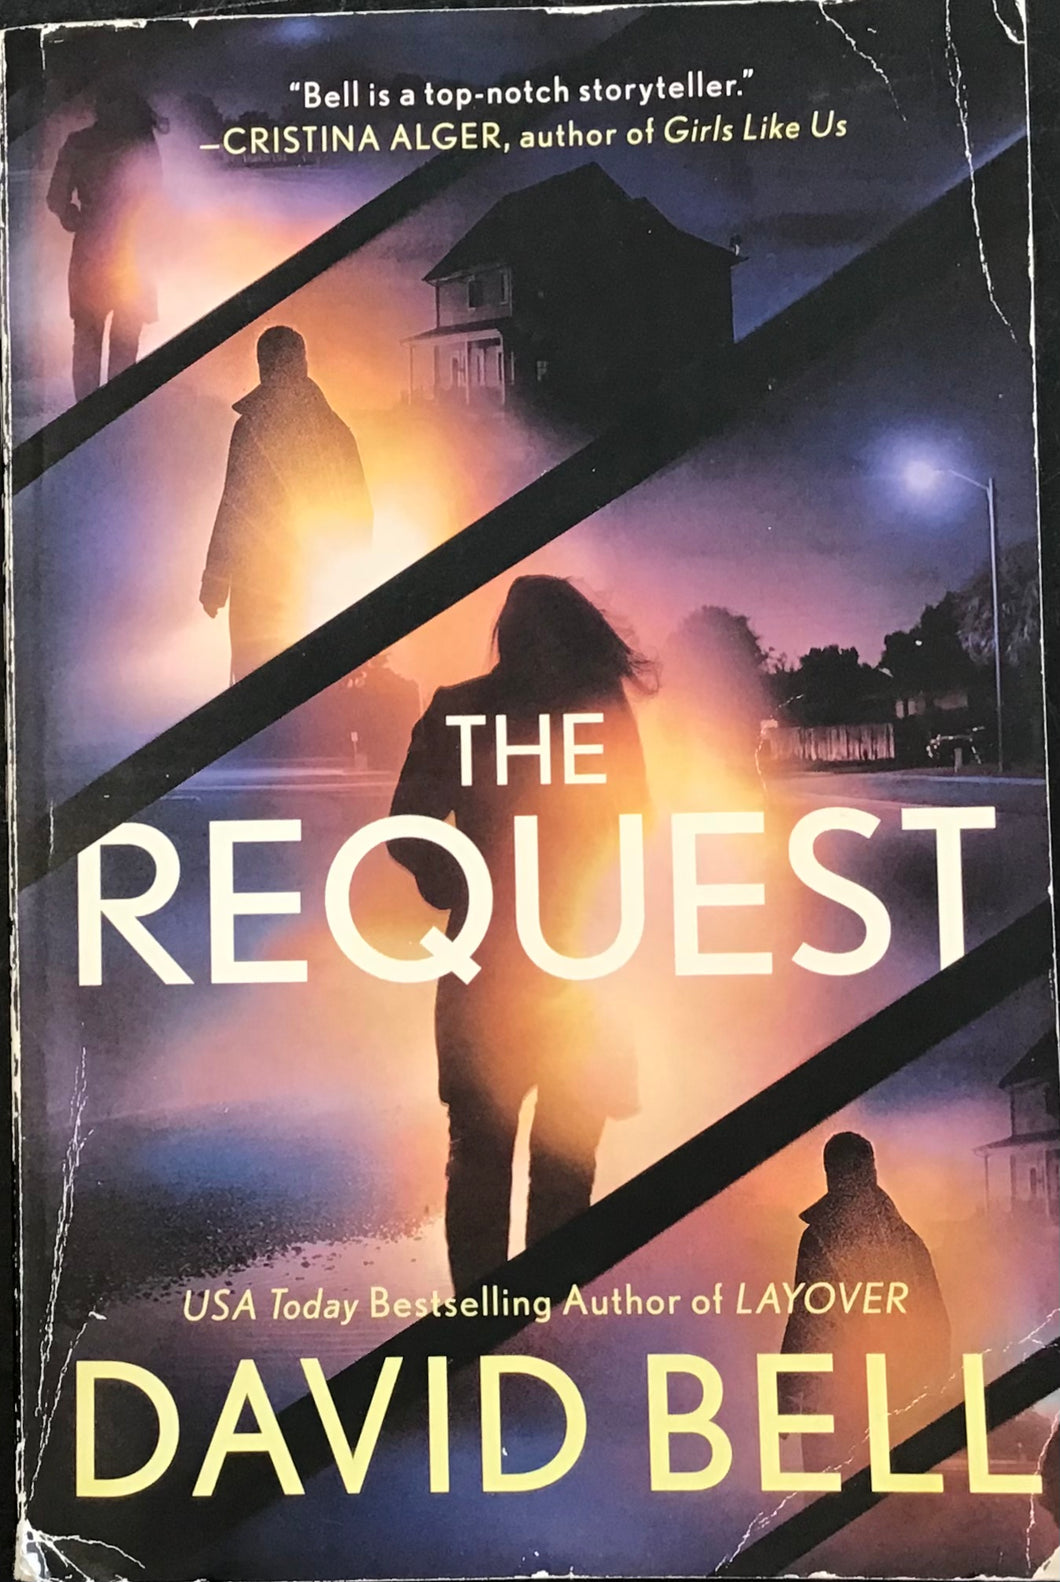 The Request, David Bell